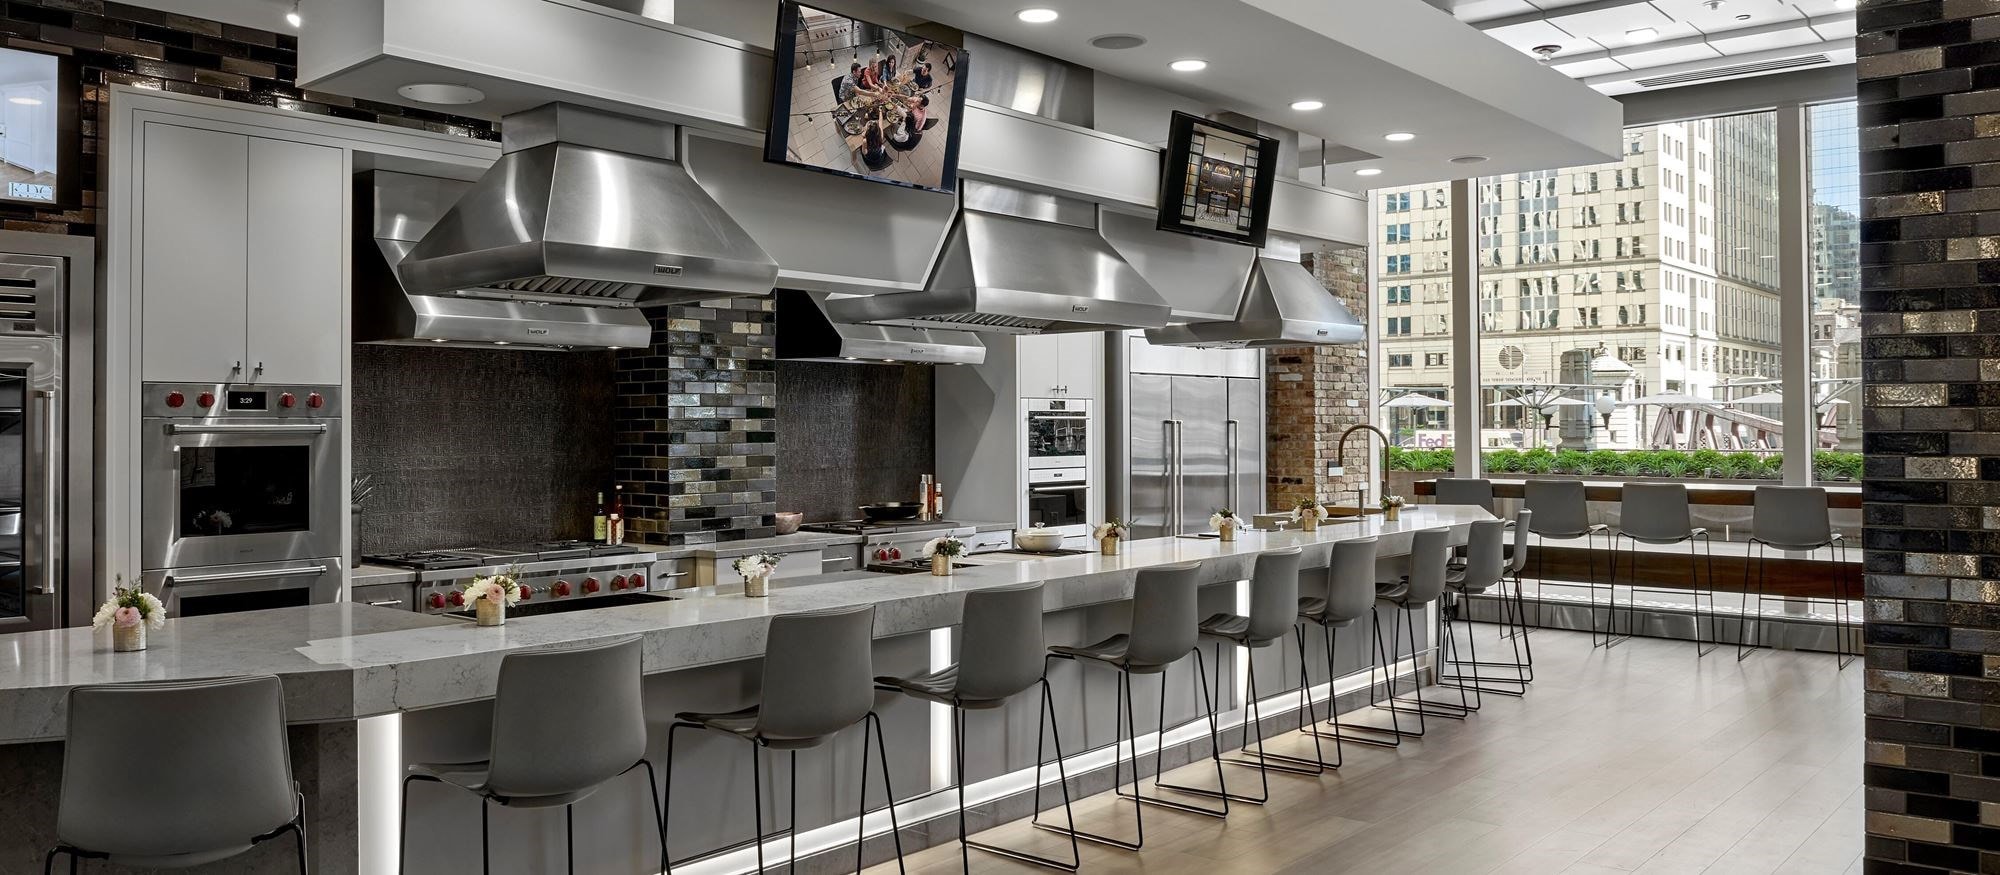 Styles and models for any kitchen in a variety of kitchen styles await at our Sub-Zero, Wolf and Cove Showroom in Chicago, Illinois